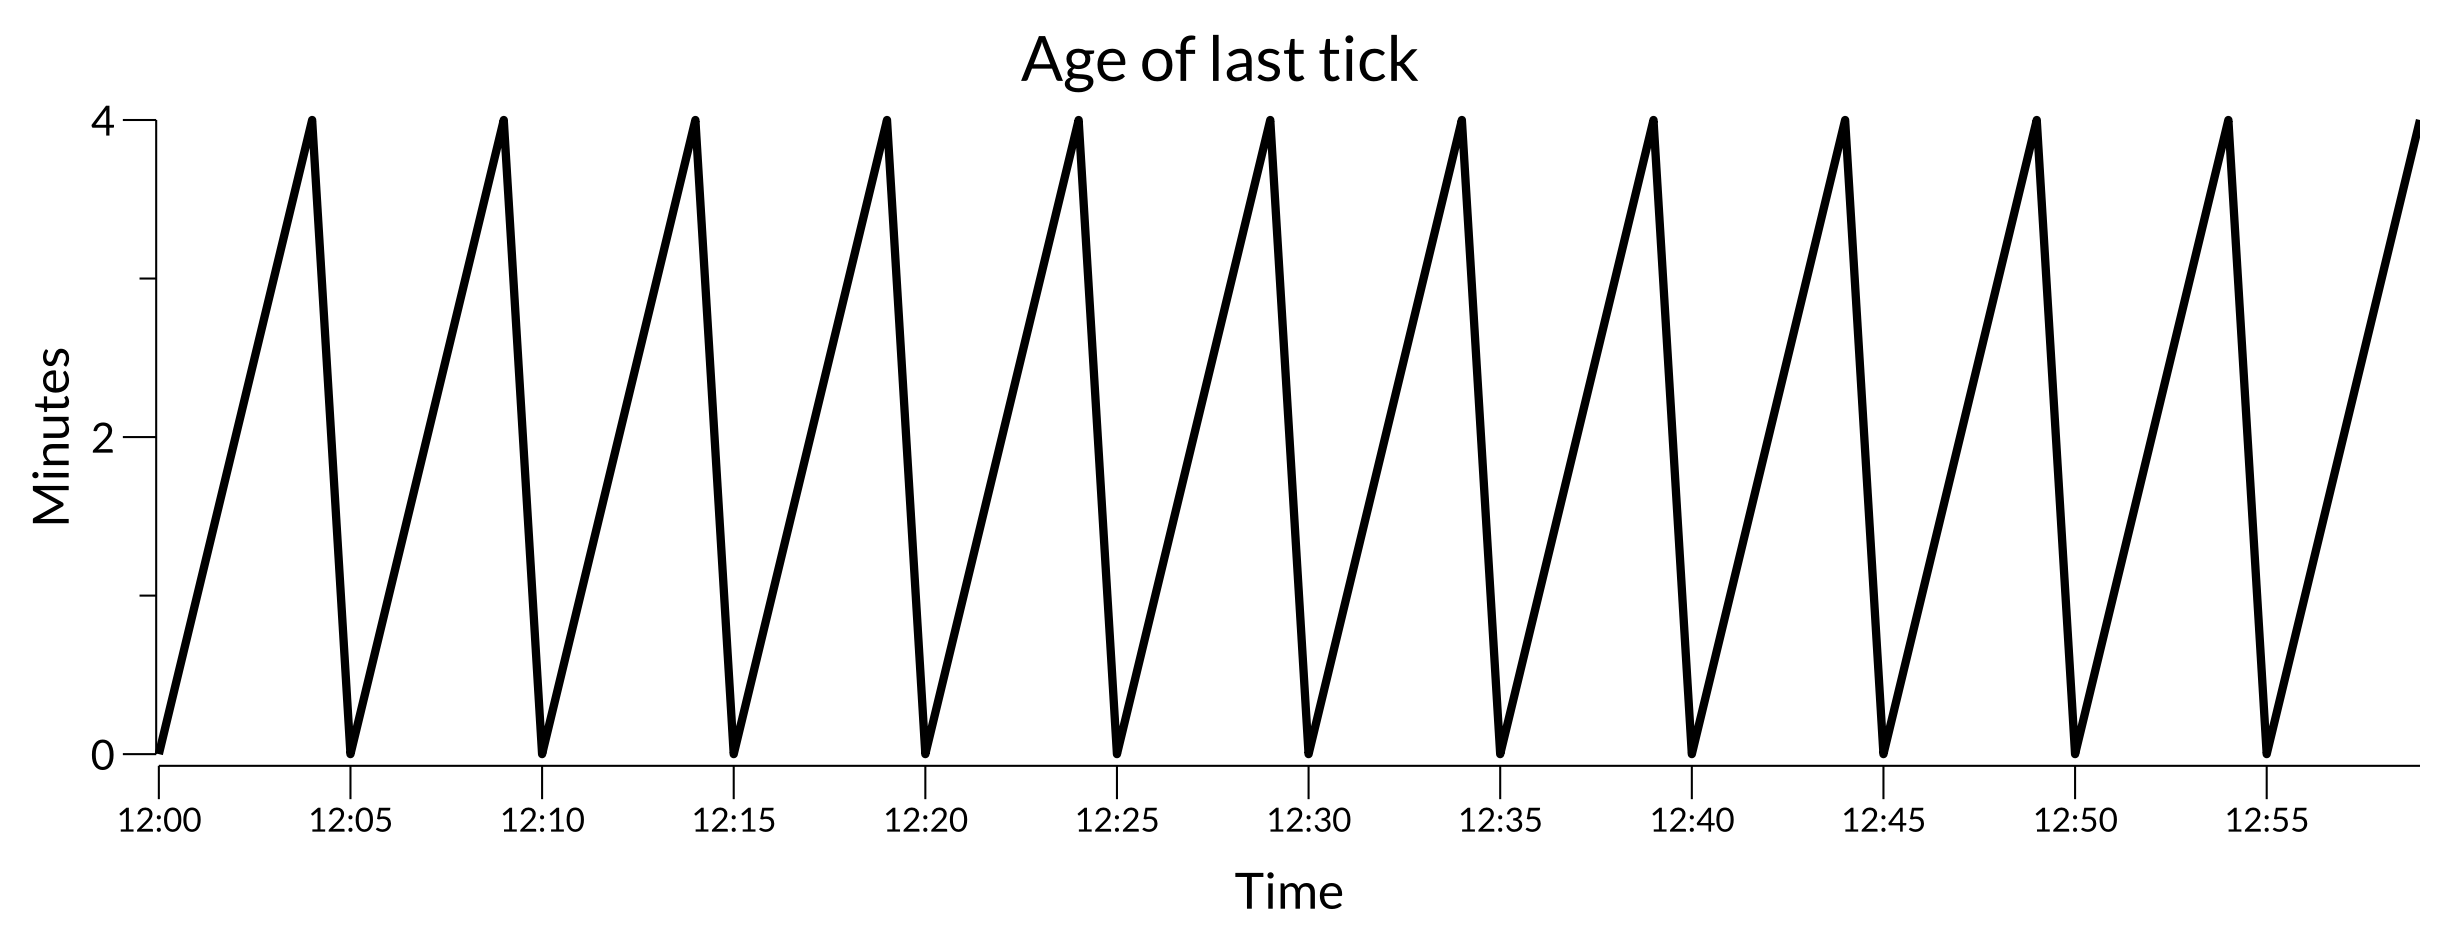 A sample time series line plot of age last tick, with minutes on the vertical axis starting at 0, trending up to 4, then dropping to 0 and repeating every 5 minutes.